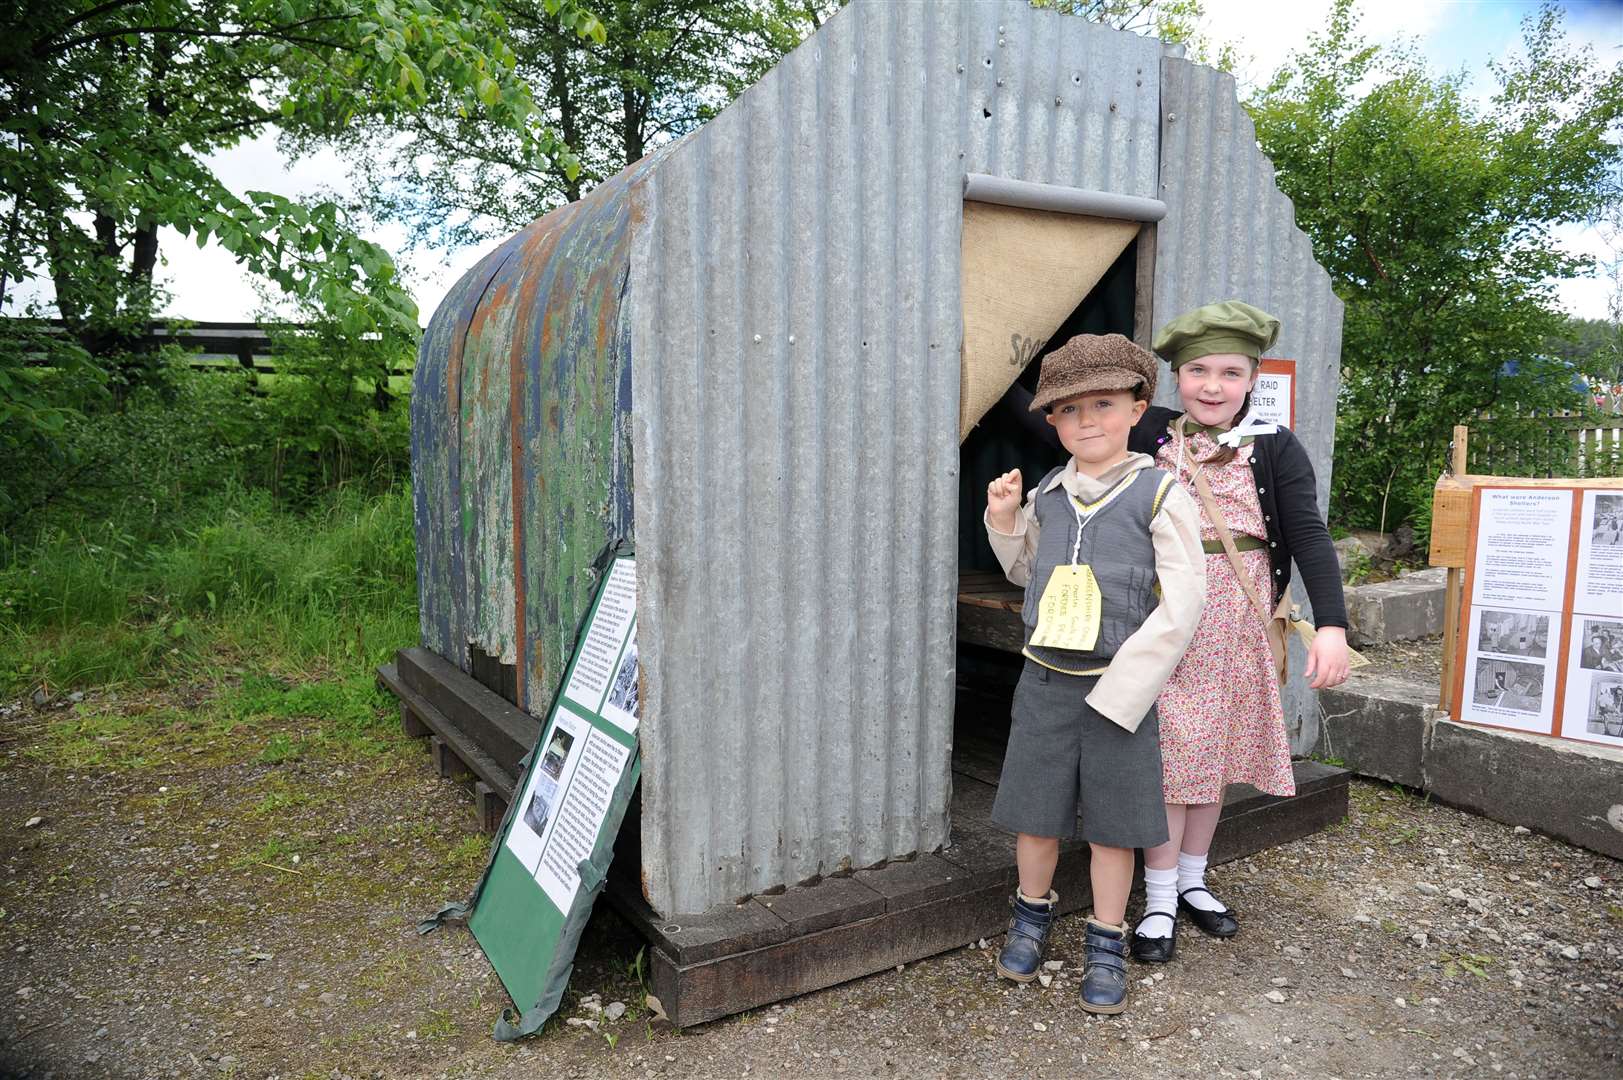 Charles Smith And Dakota Meldrum emerge from an Anderson Shelter. Families of more than four would have to share beds during air raids. Picture: Eric Cormack. Image No.044182.